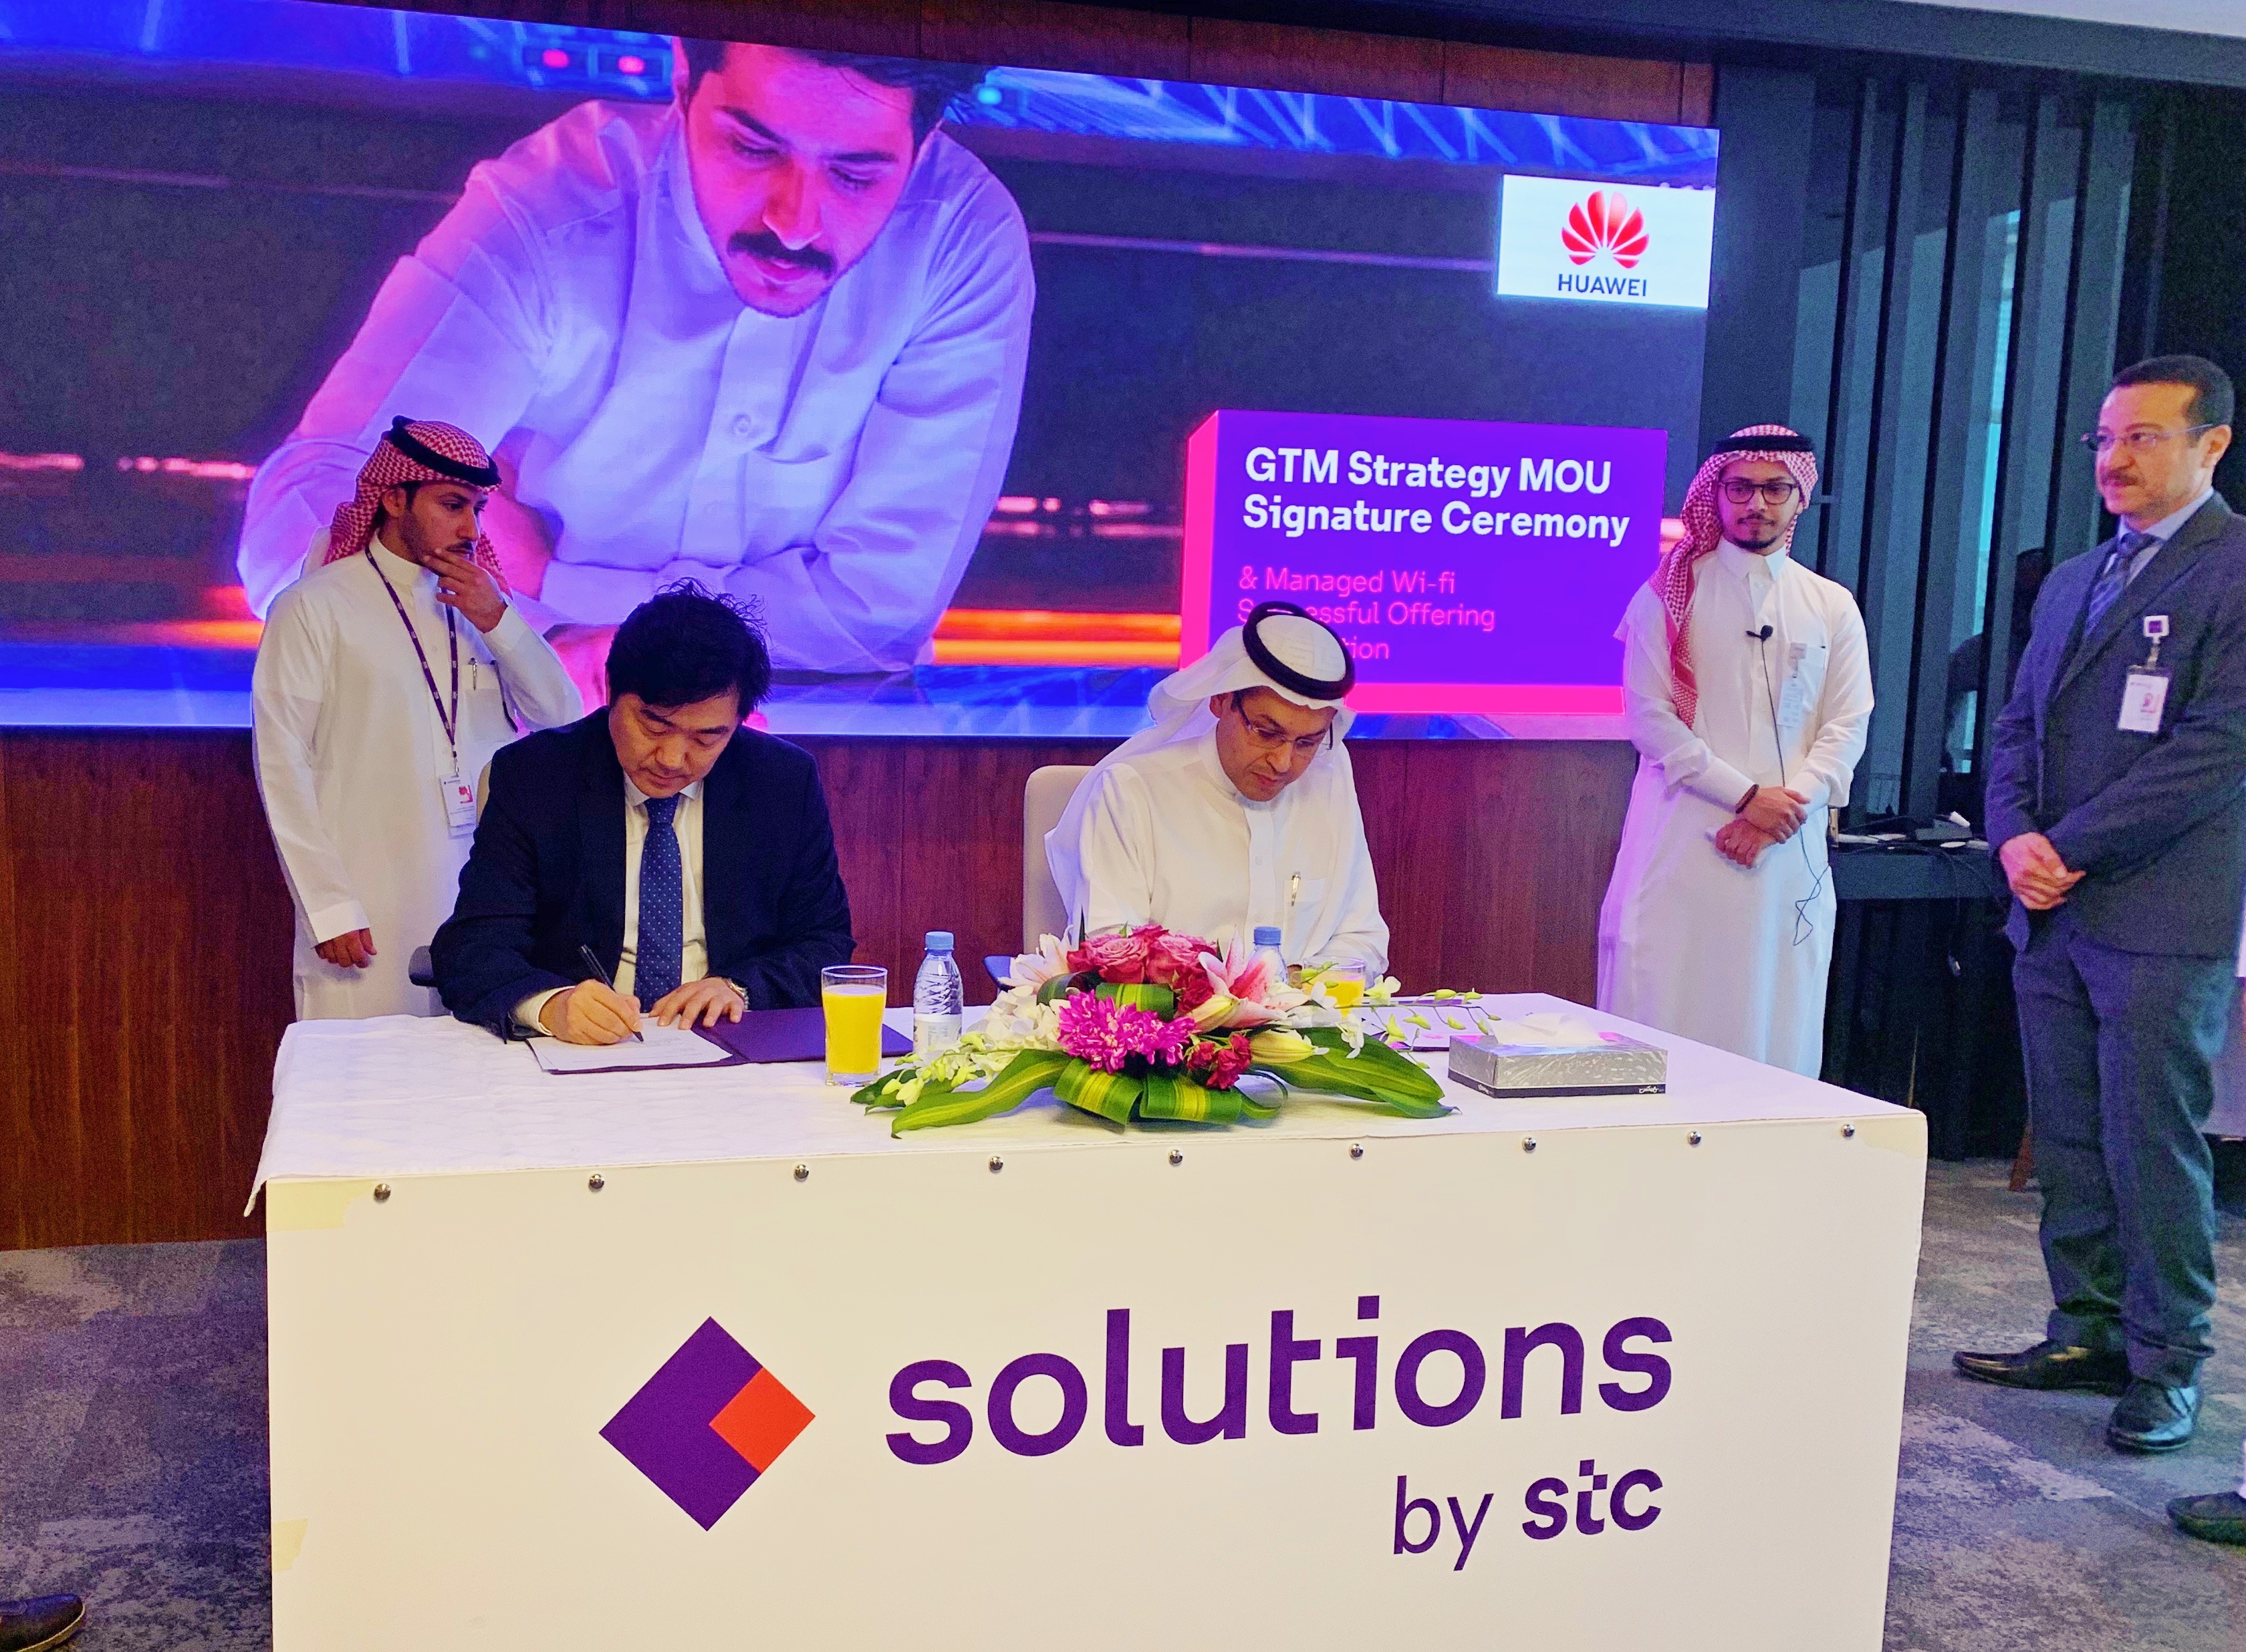 Seated representatives from the Saudi Telecom Company and Huawei sign a GTM MoU, a partnership called Solutions by STC